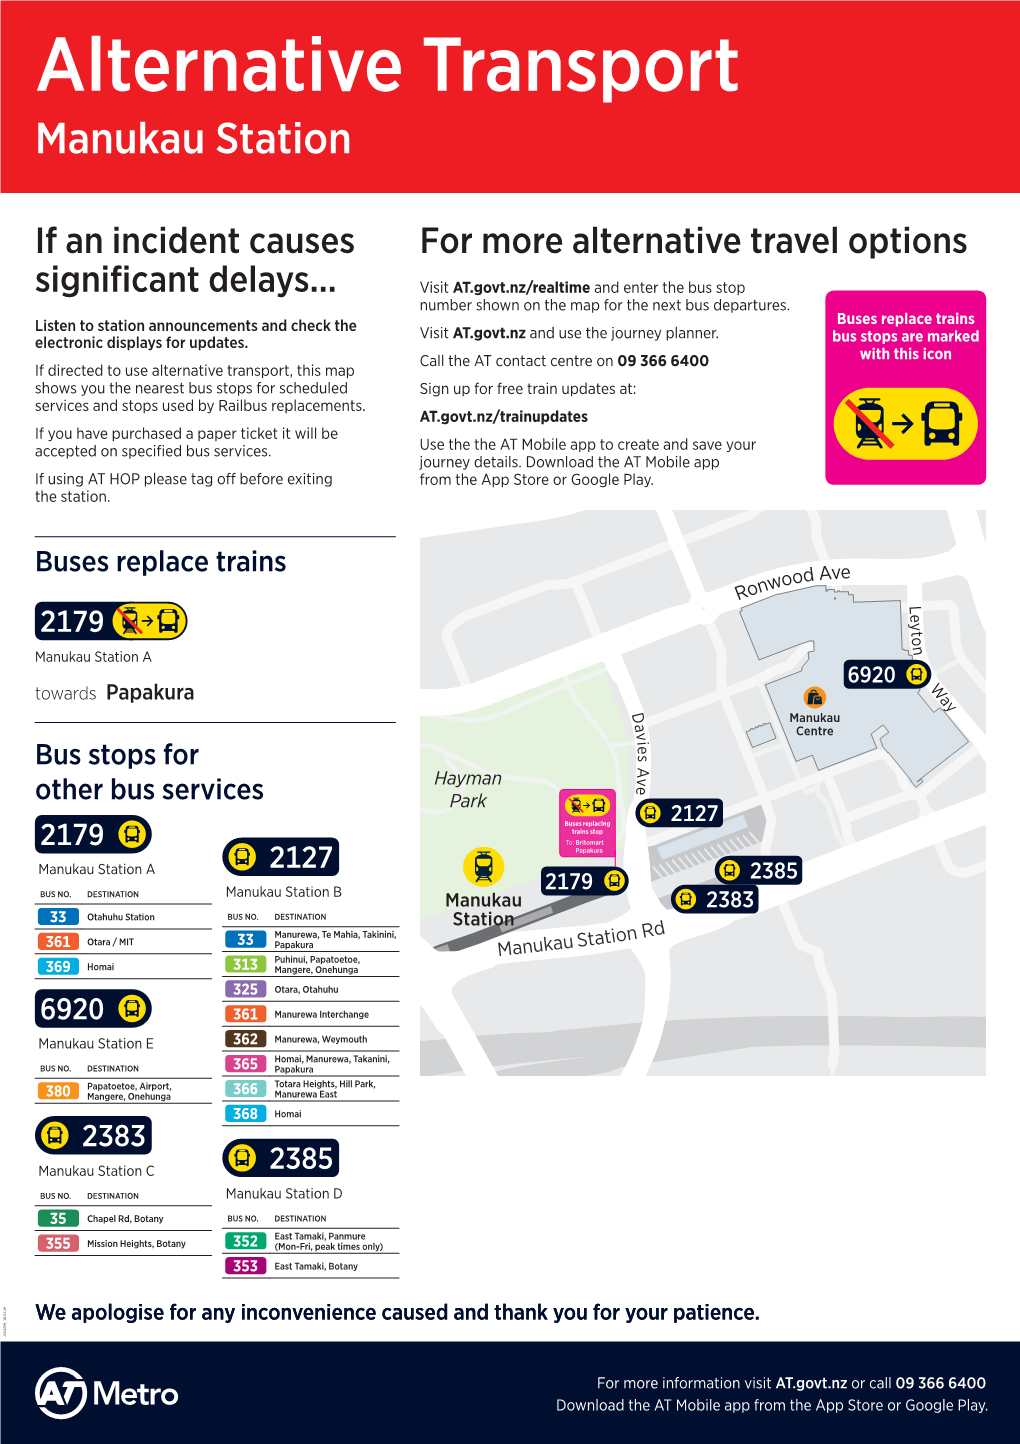 If an Incident Causes Significant Delays... for More Alternative Travel Options